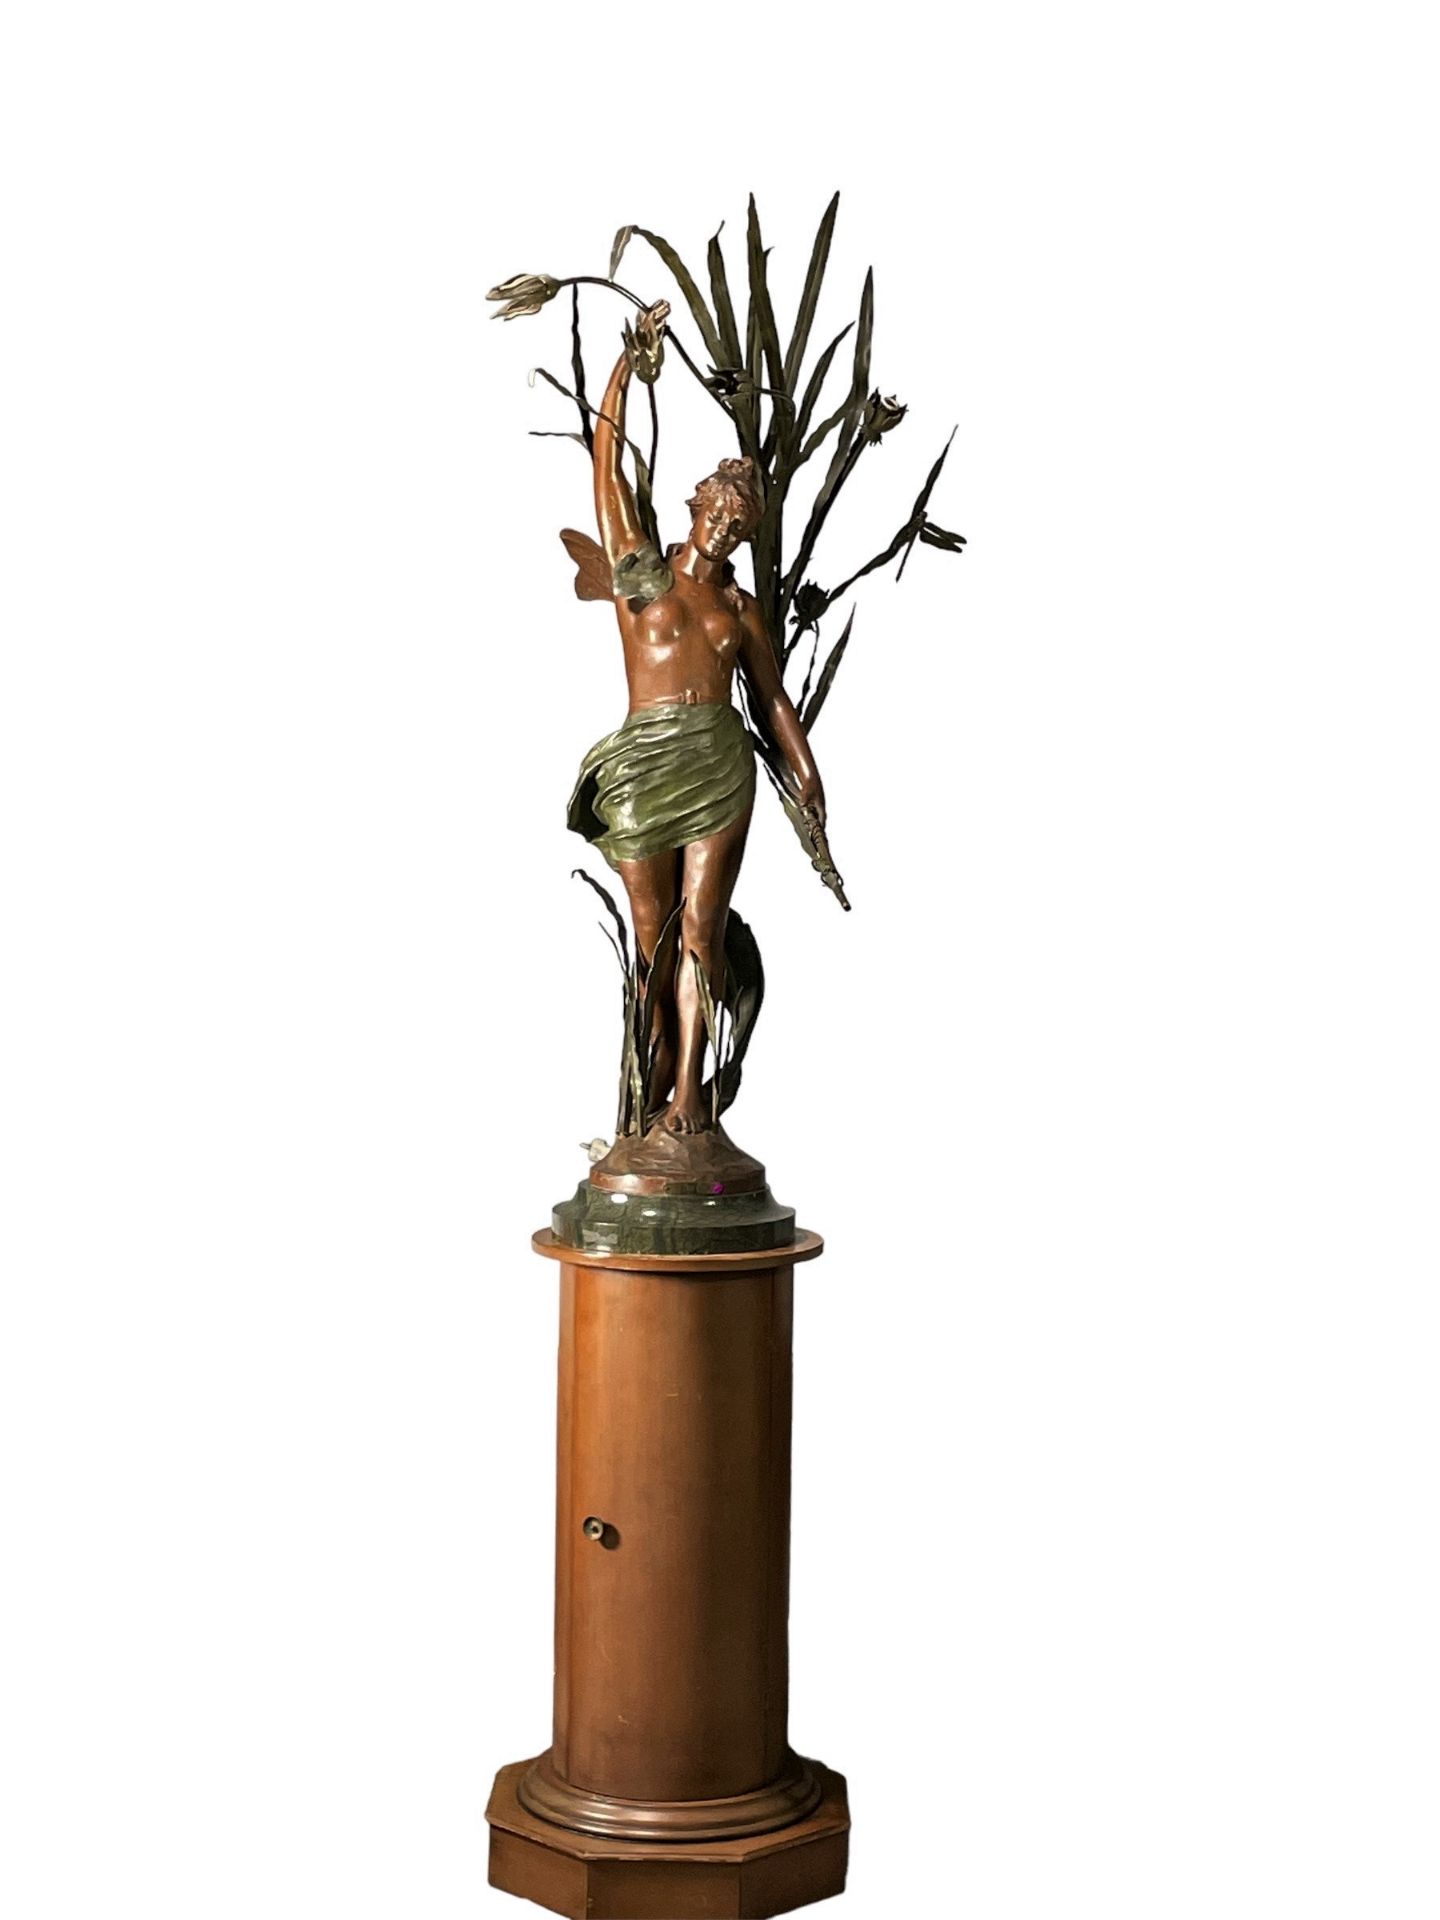 Large lamp "young woman with reeds and dragonflies" Art Nouveau - Image 4 of 4